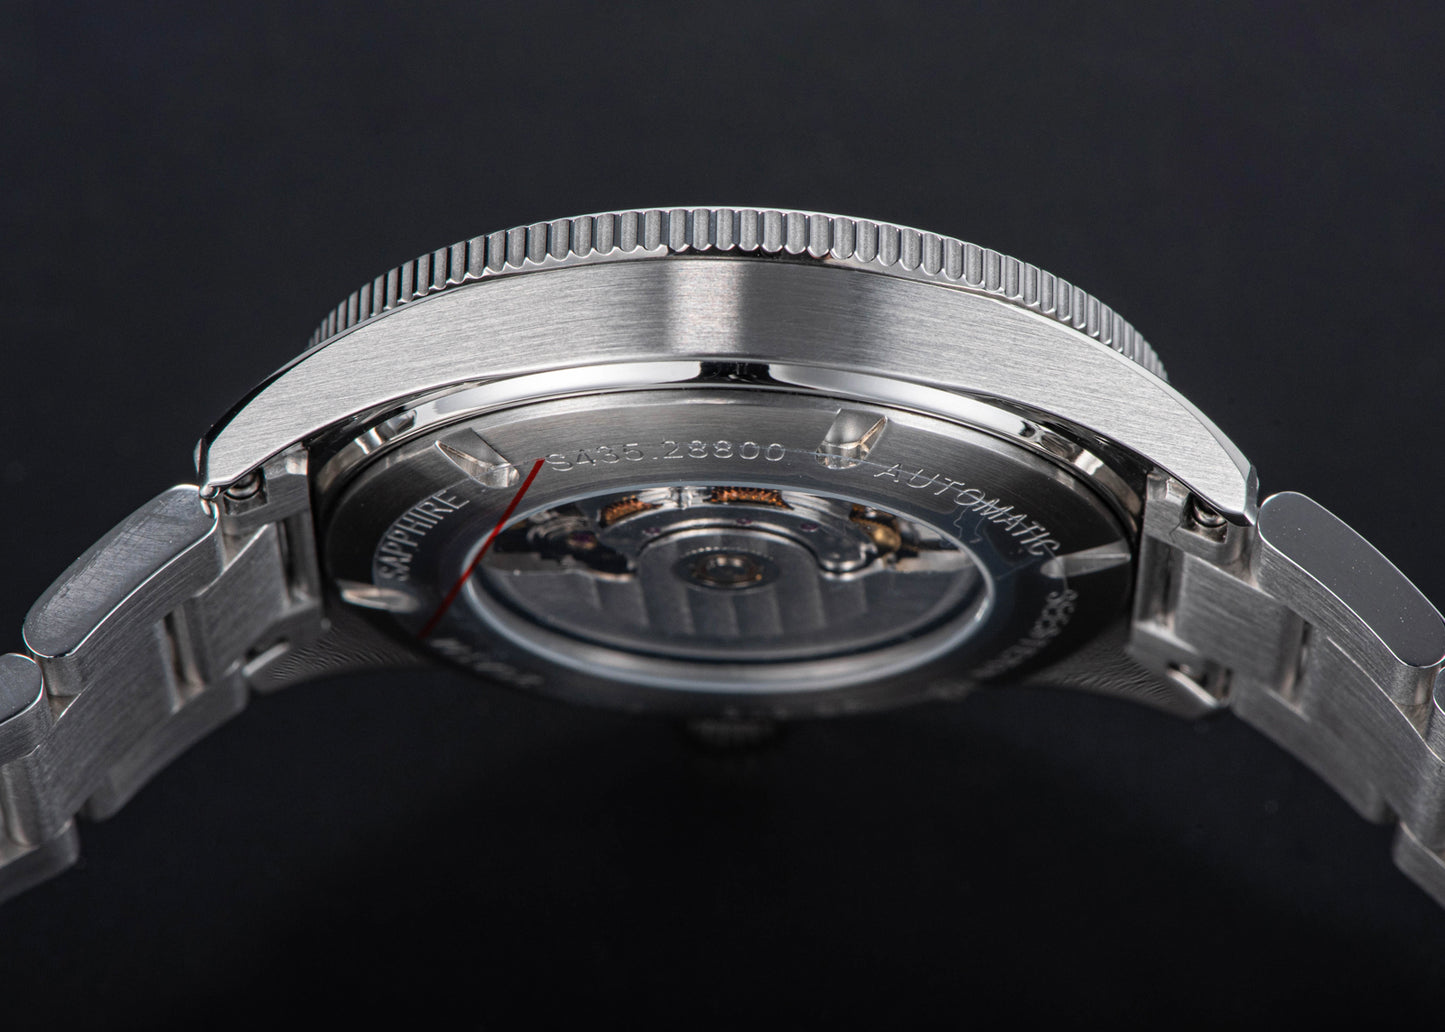 Seestern S435 Professional Diver Stainless-Steel Bracelet (Seagull ST2130 movement)